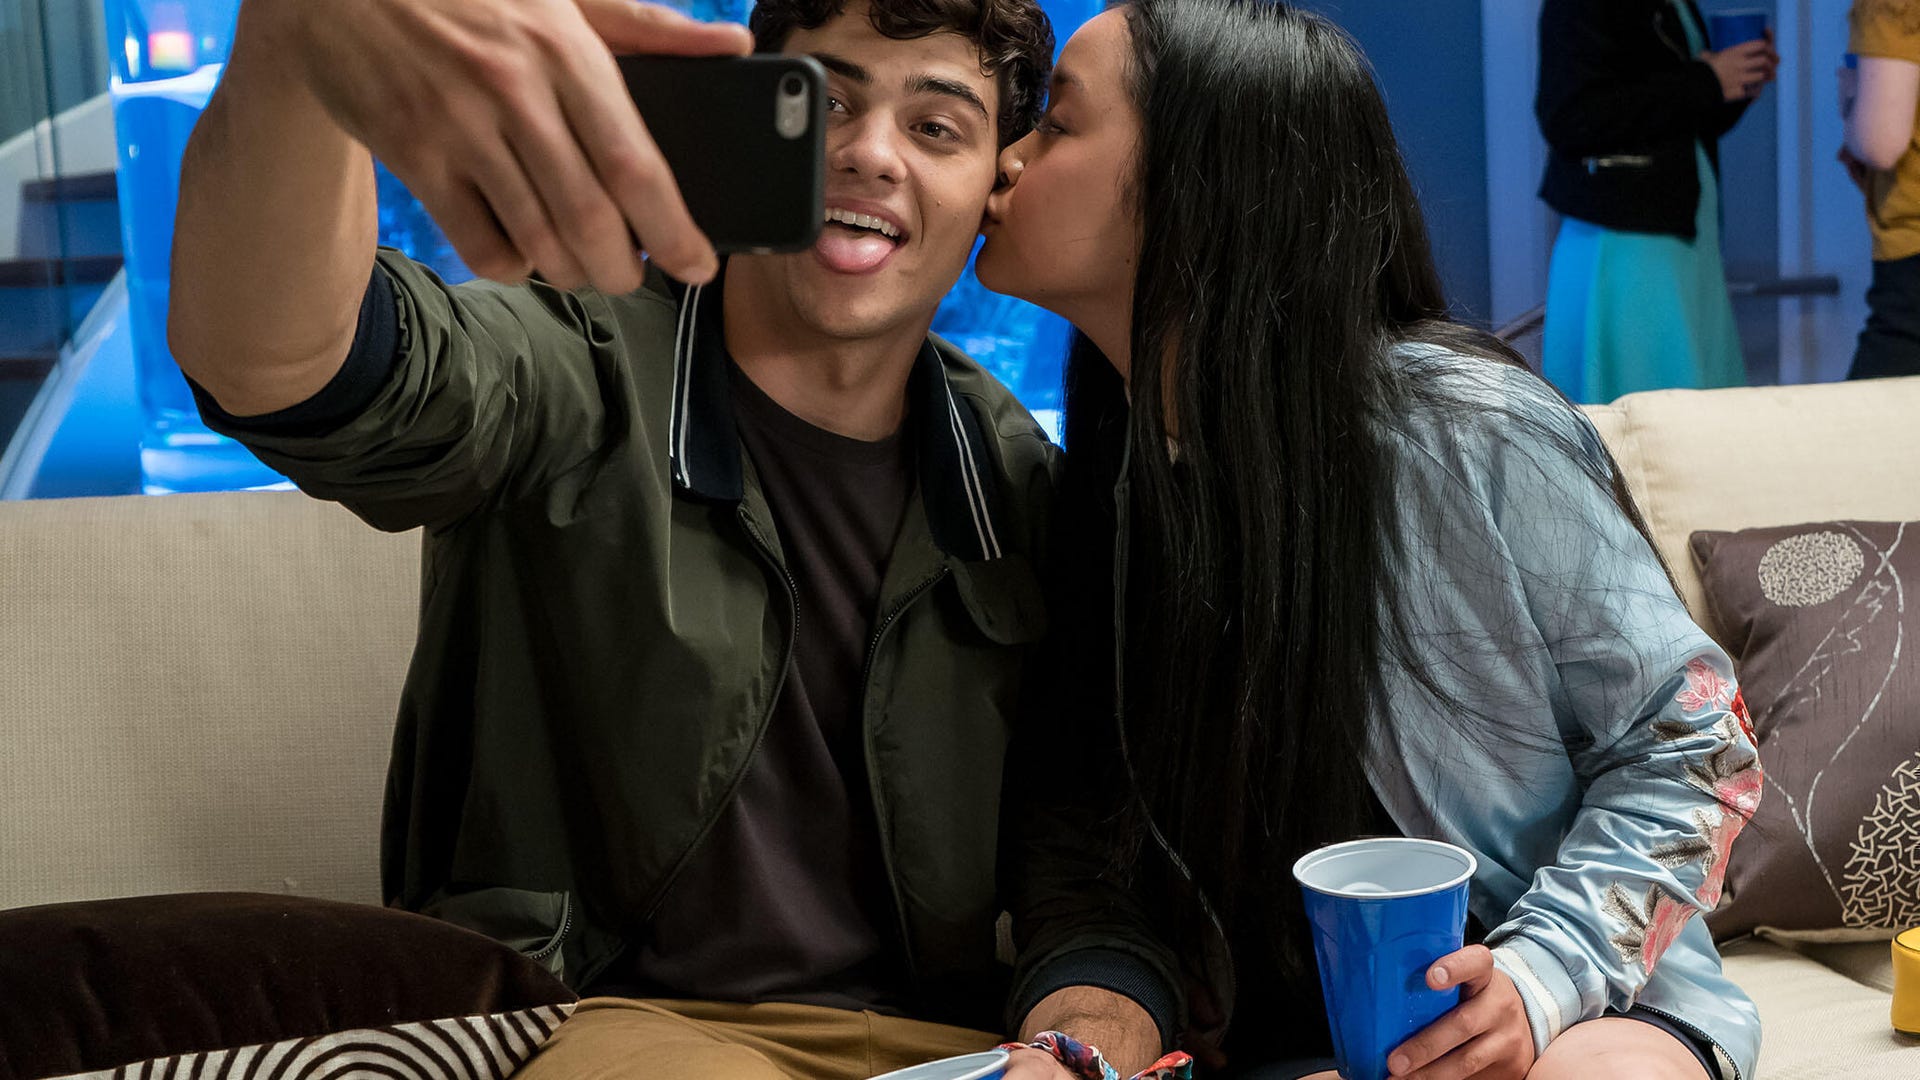 Noah Centineo and Lana Condor, To All the Boys I've Loved Before​